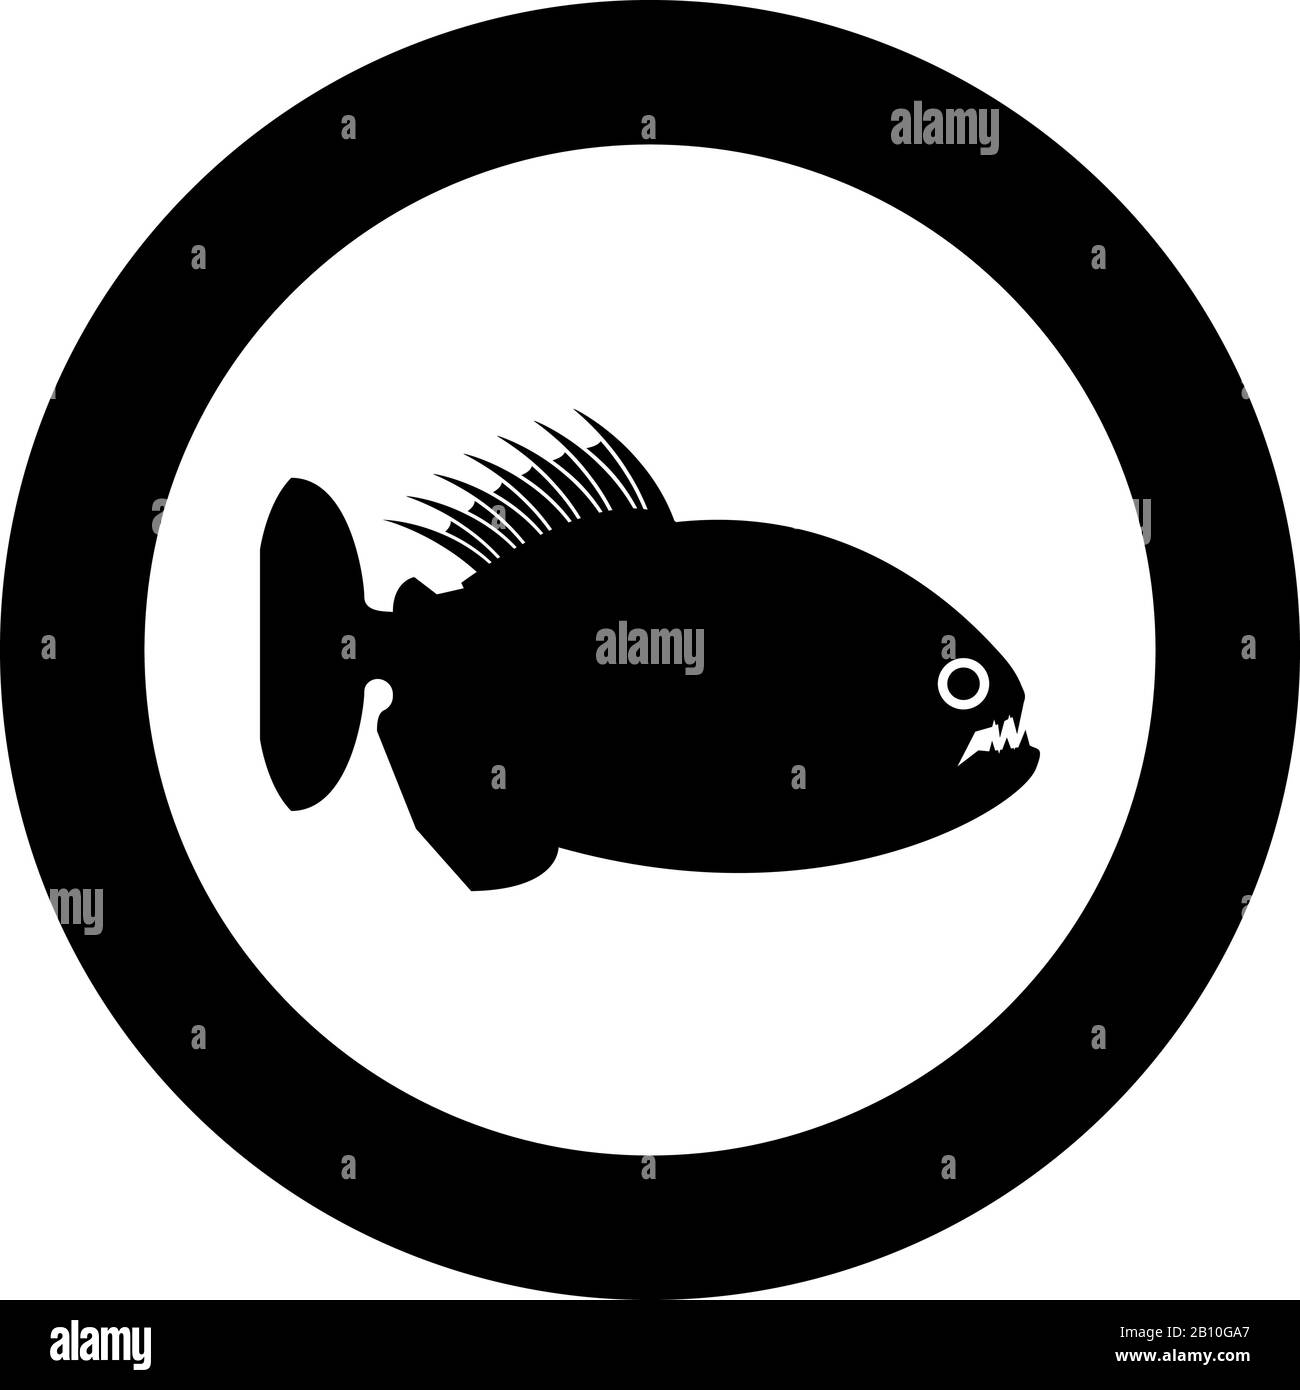 Piranha angry fish icon in circle round black color vector illustration flat style simple image Stock Vector